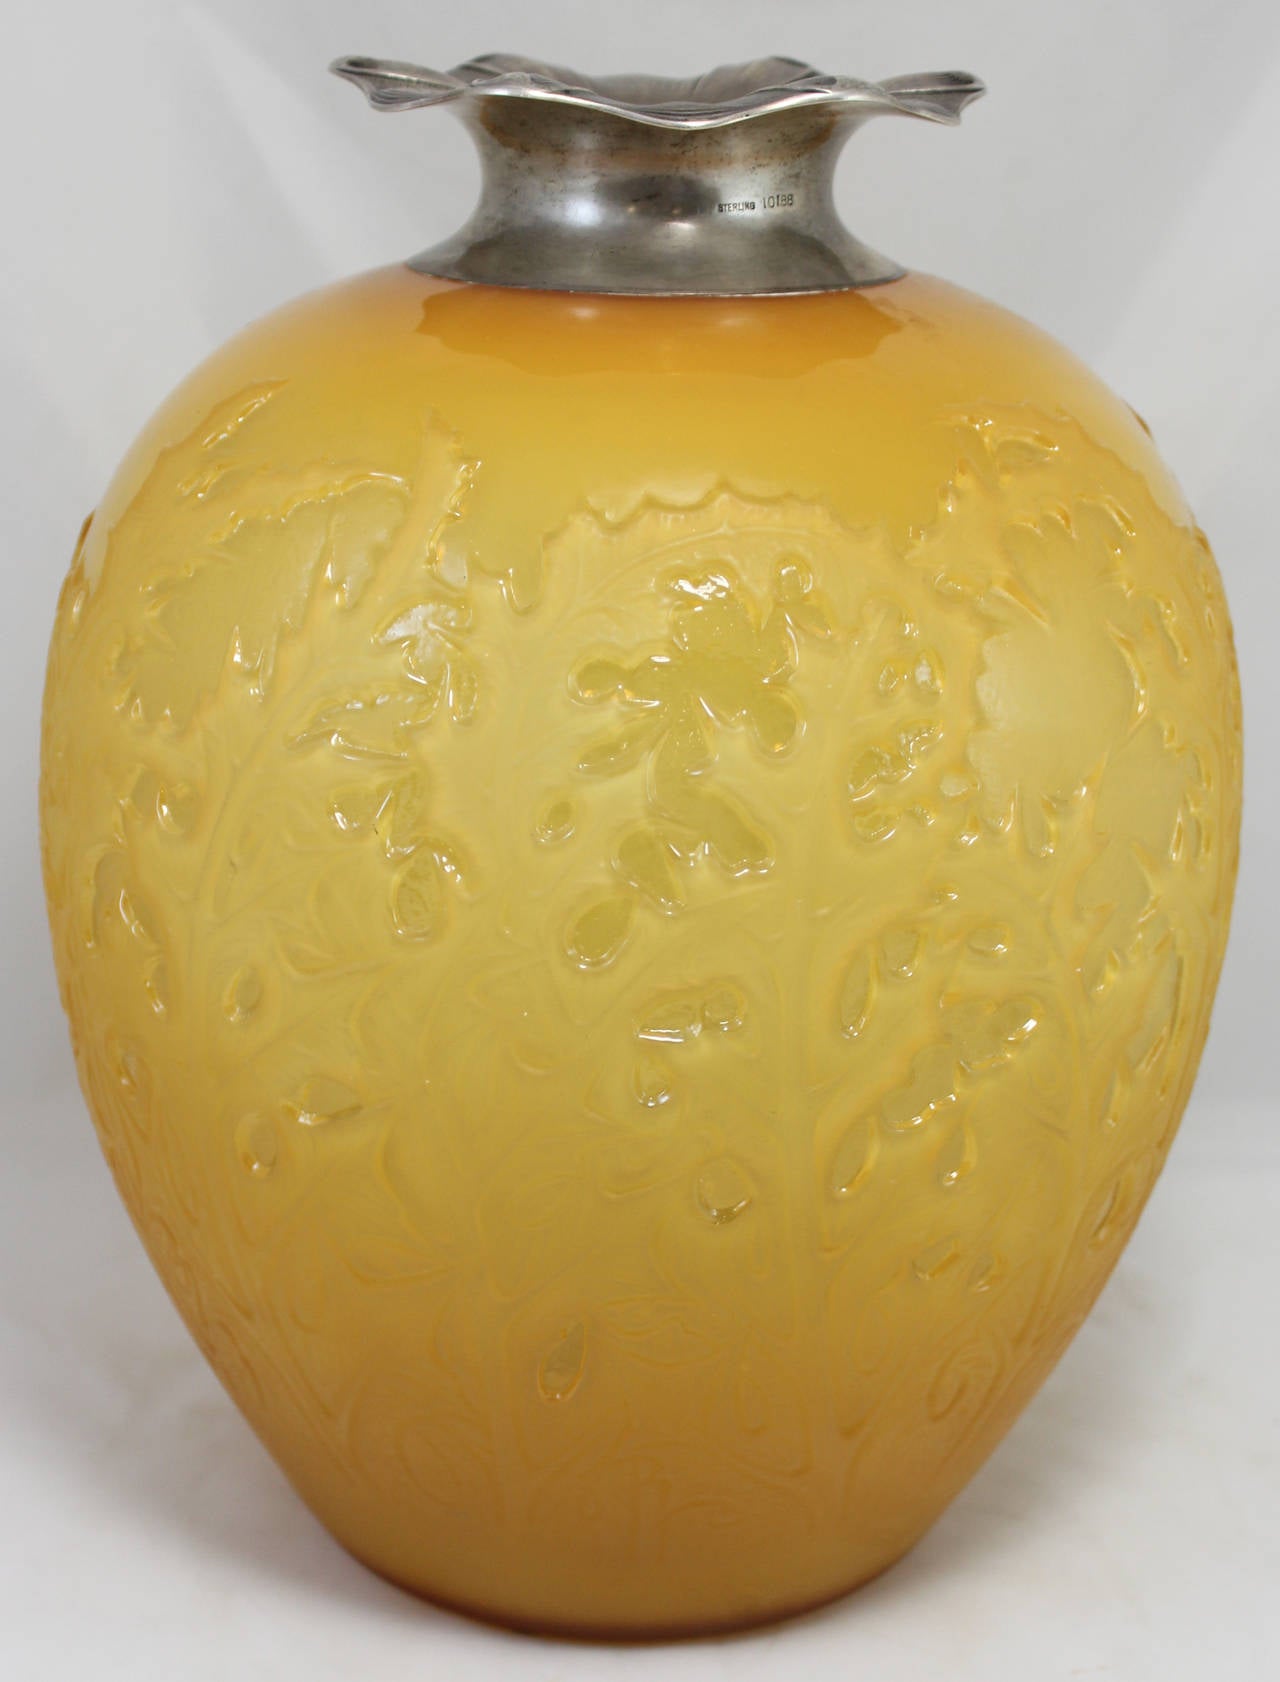 A magnificent glass amber vase in the Acanthus pattern, signed on base R. Lalique. Circa 1920-1925.  Rare form with beautiful color. Sterling top is a later addition.